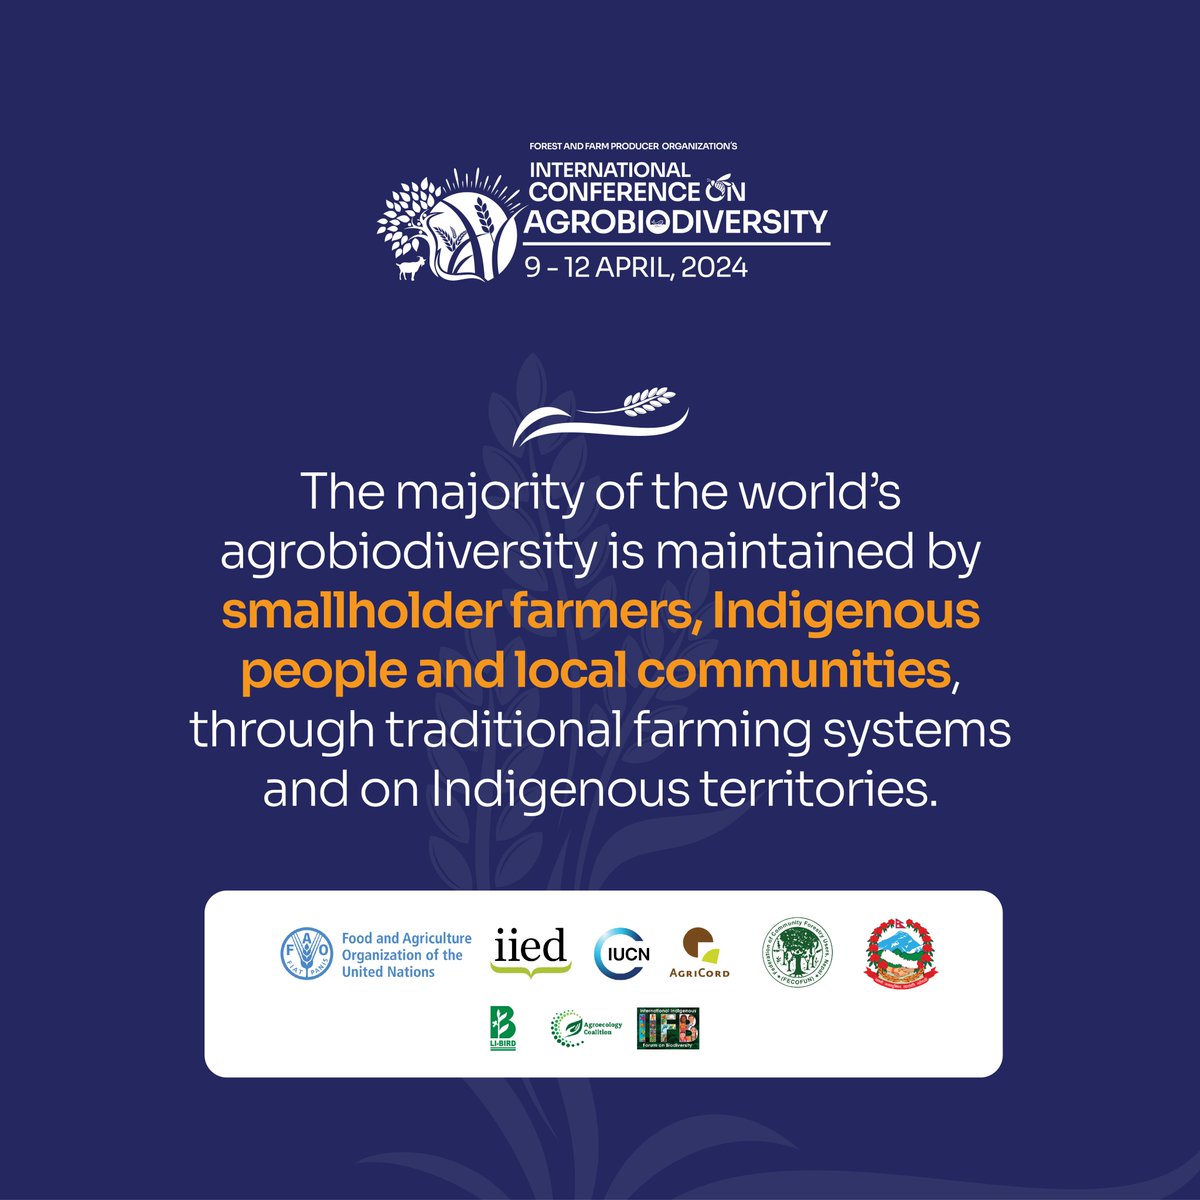 International Conference on Agrobiodiversity Please register to the link fao.zoom.us/webinar/regist… for the virtual participation in International Conference on Agrobiodiversity #ICA2024 #FFF #InternationalConferenceonAgrobiodiversity #agrobiodiversity